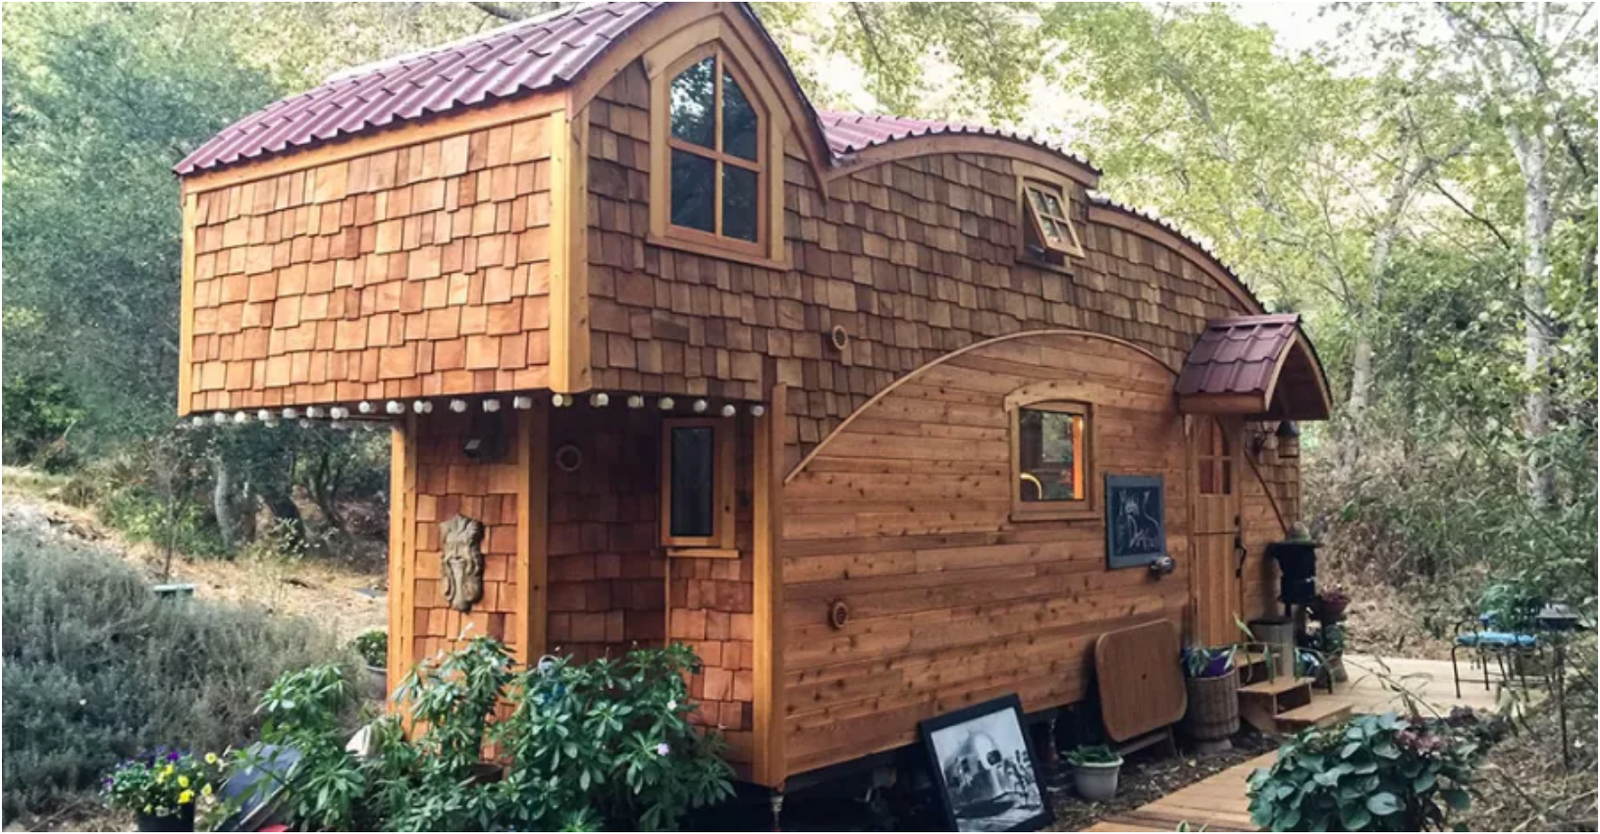 Moon Dragon Tiny House Is Marvelously Unique